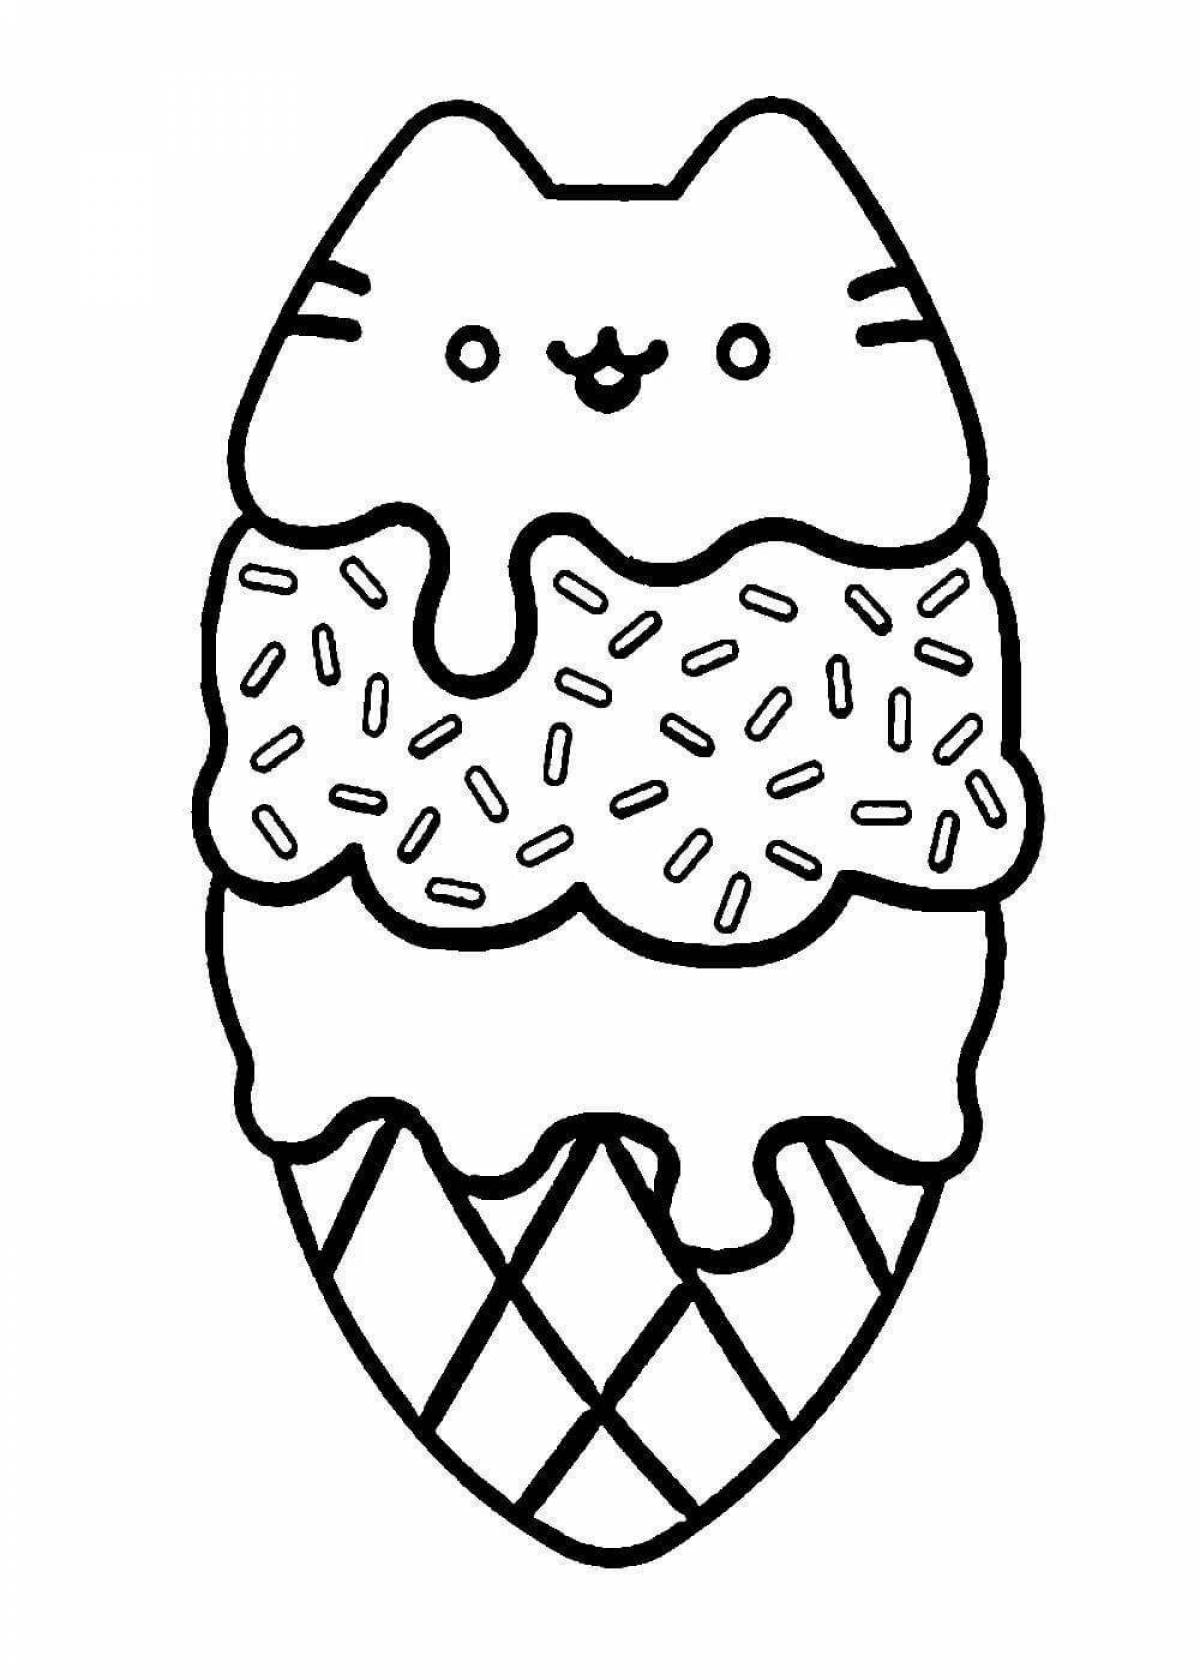 Sunny pusheen coloring book for kids